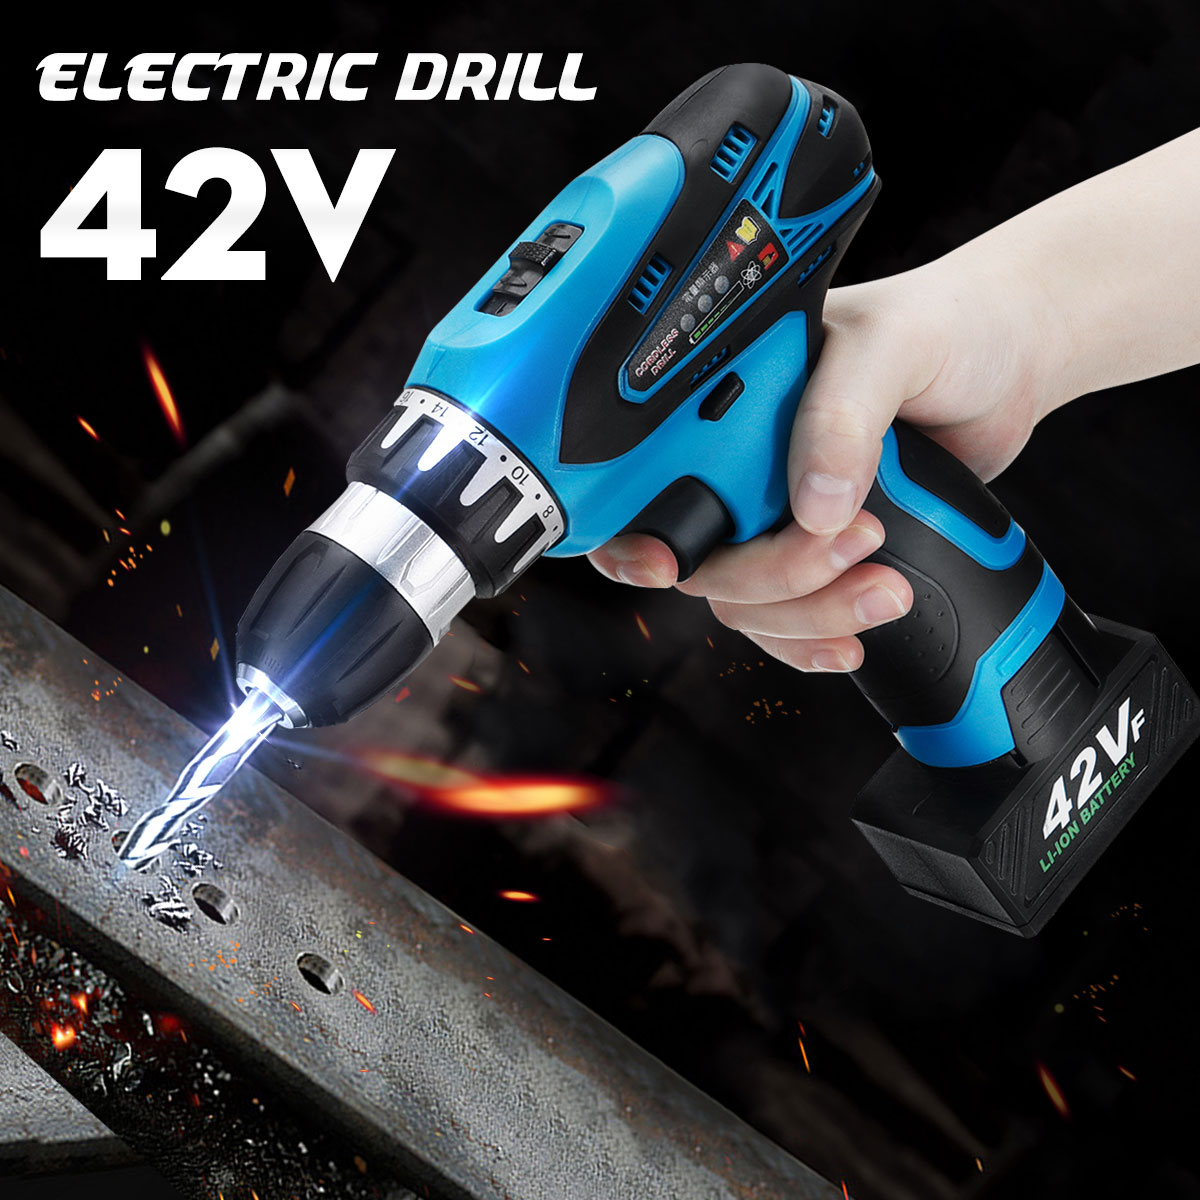 42V-9000mAh-Electric-Cordless-Drill-Driver-LED-2-Speed-Screwdriver-W-1-or-2-Li-Ion-Battery-1451594-2